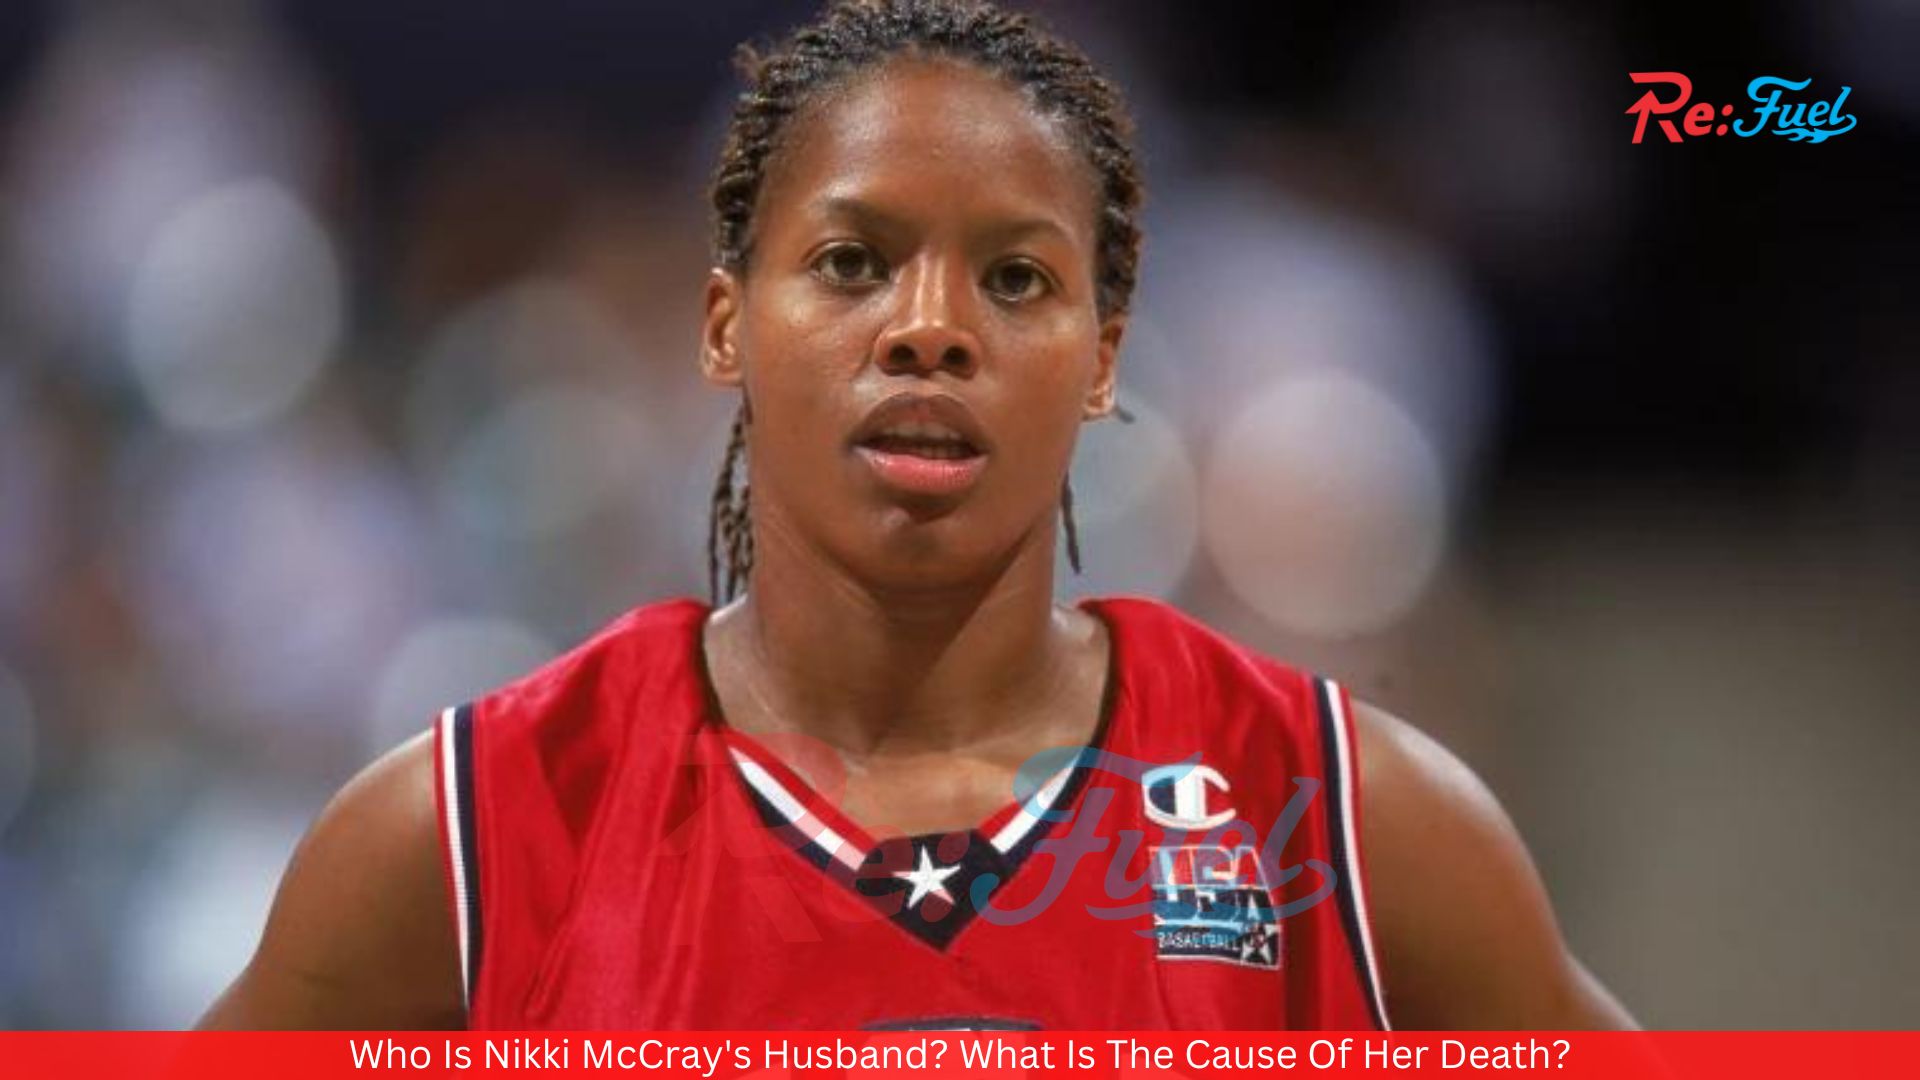 Who Is Nikki McCray's Husband? What Is The Cause Of Her Death?